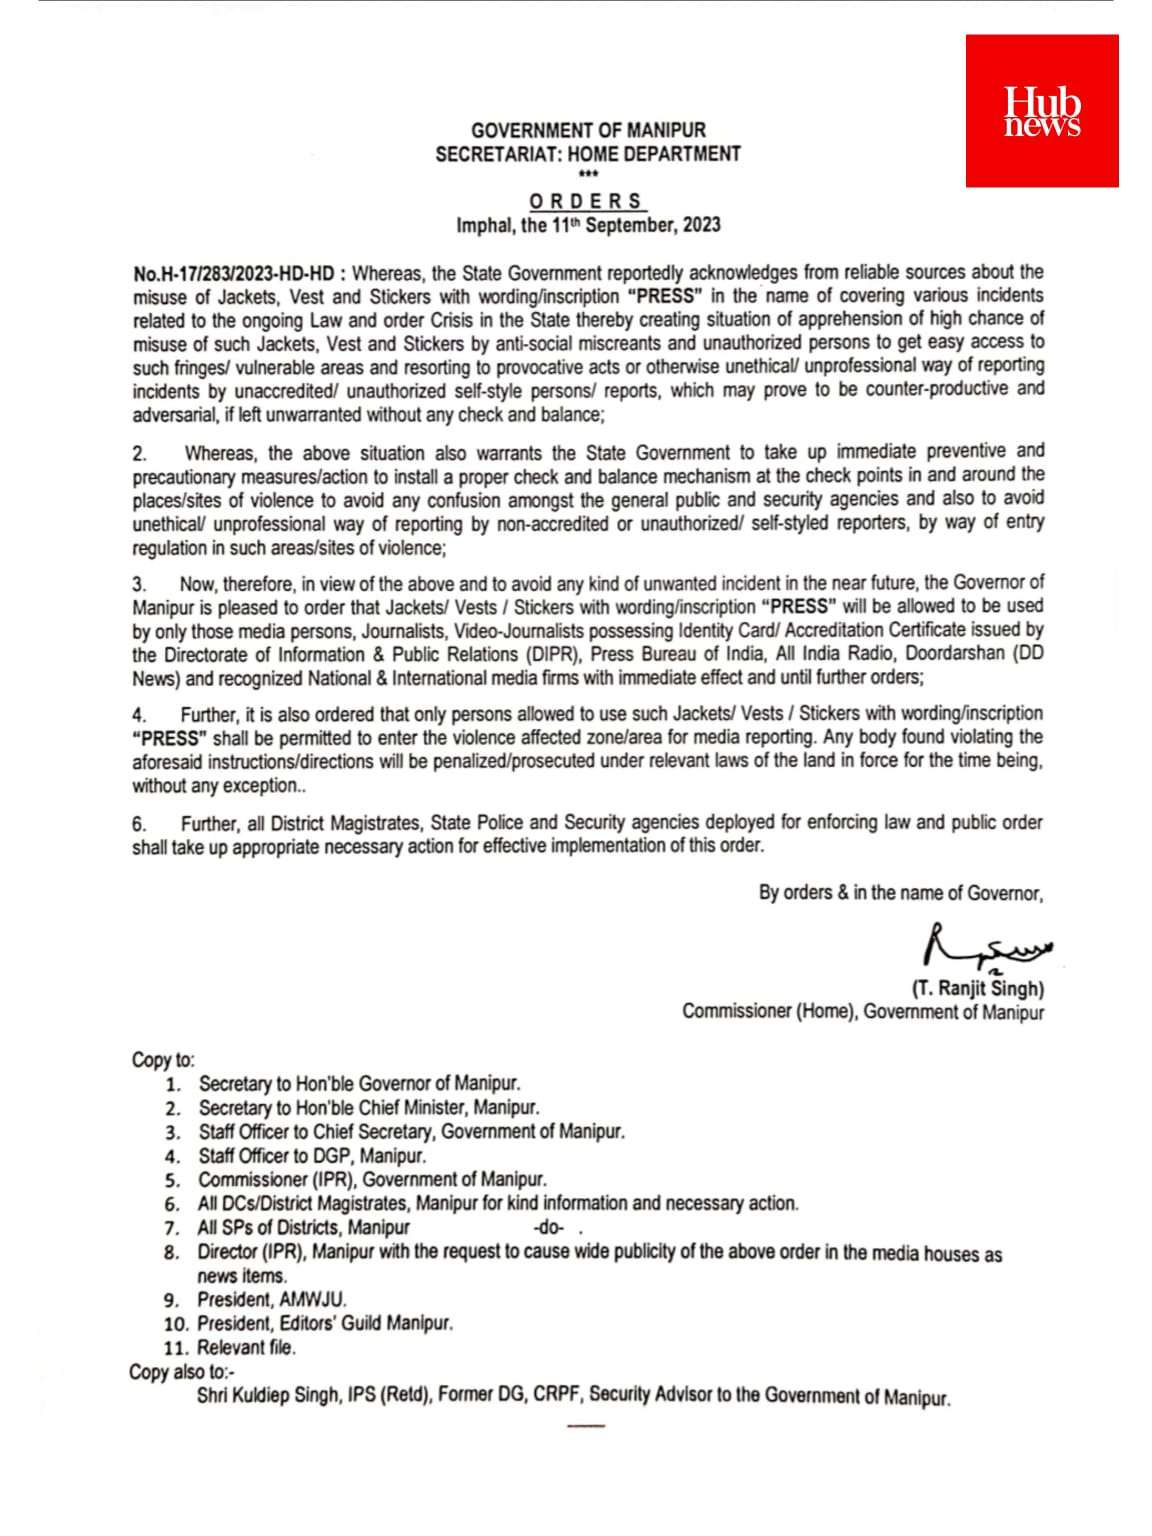 Manipur govt restricts use of word "PRESS" to media persons having accreditation certificates